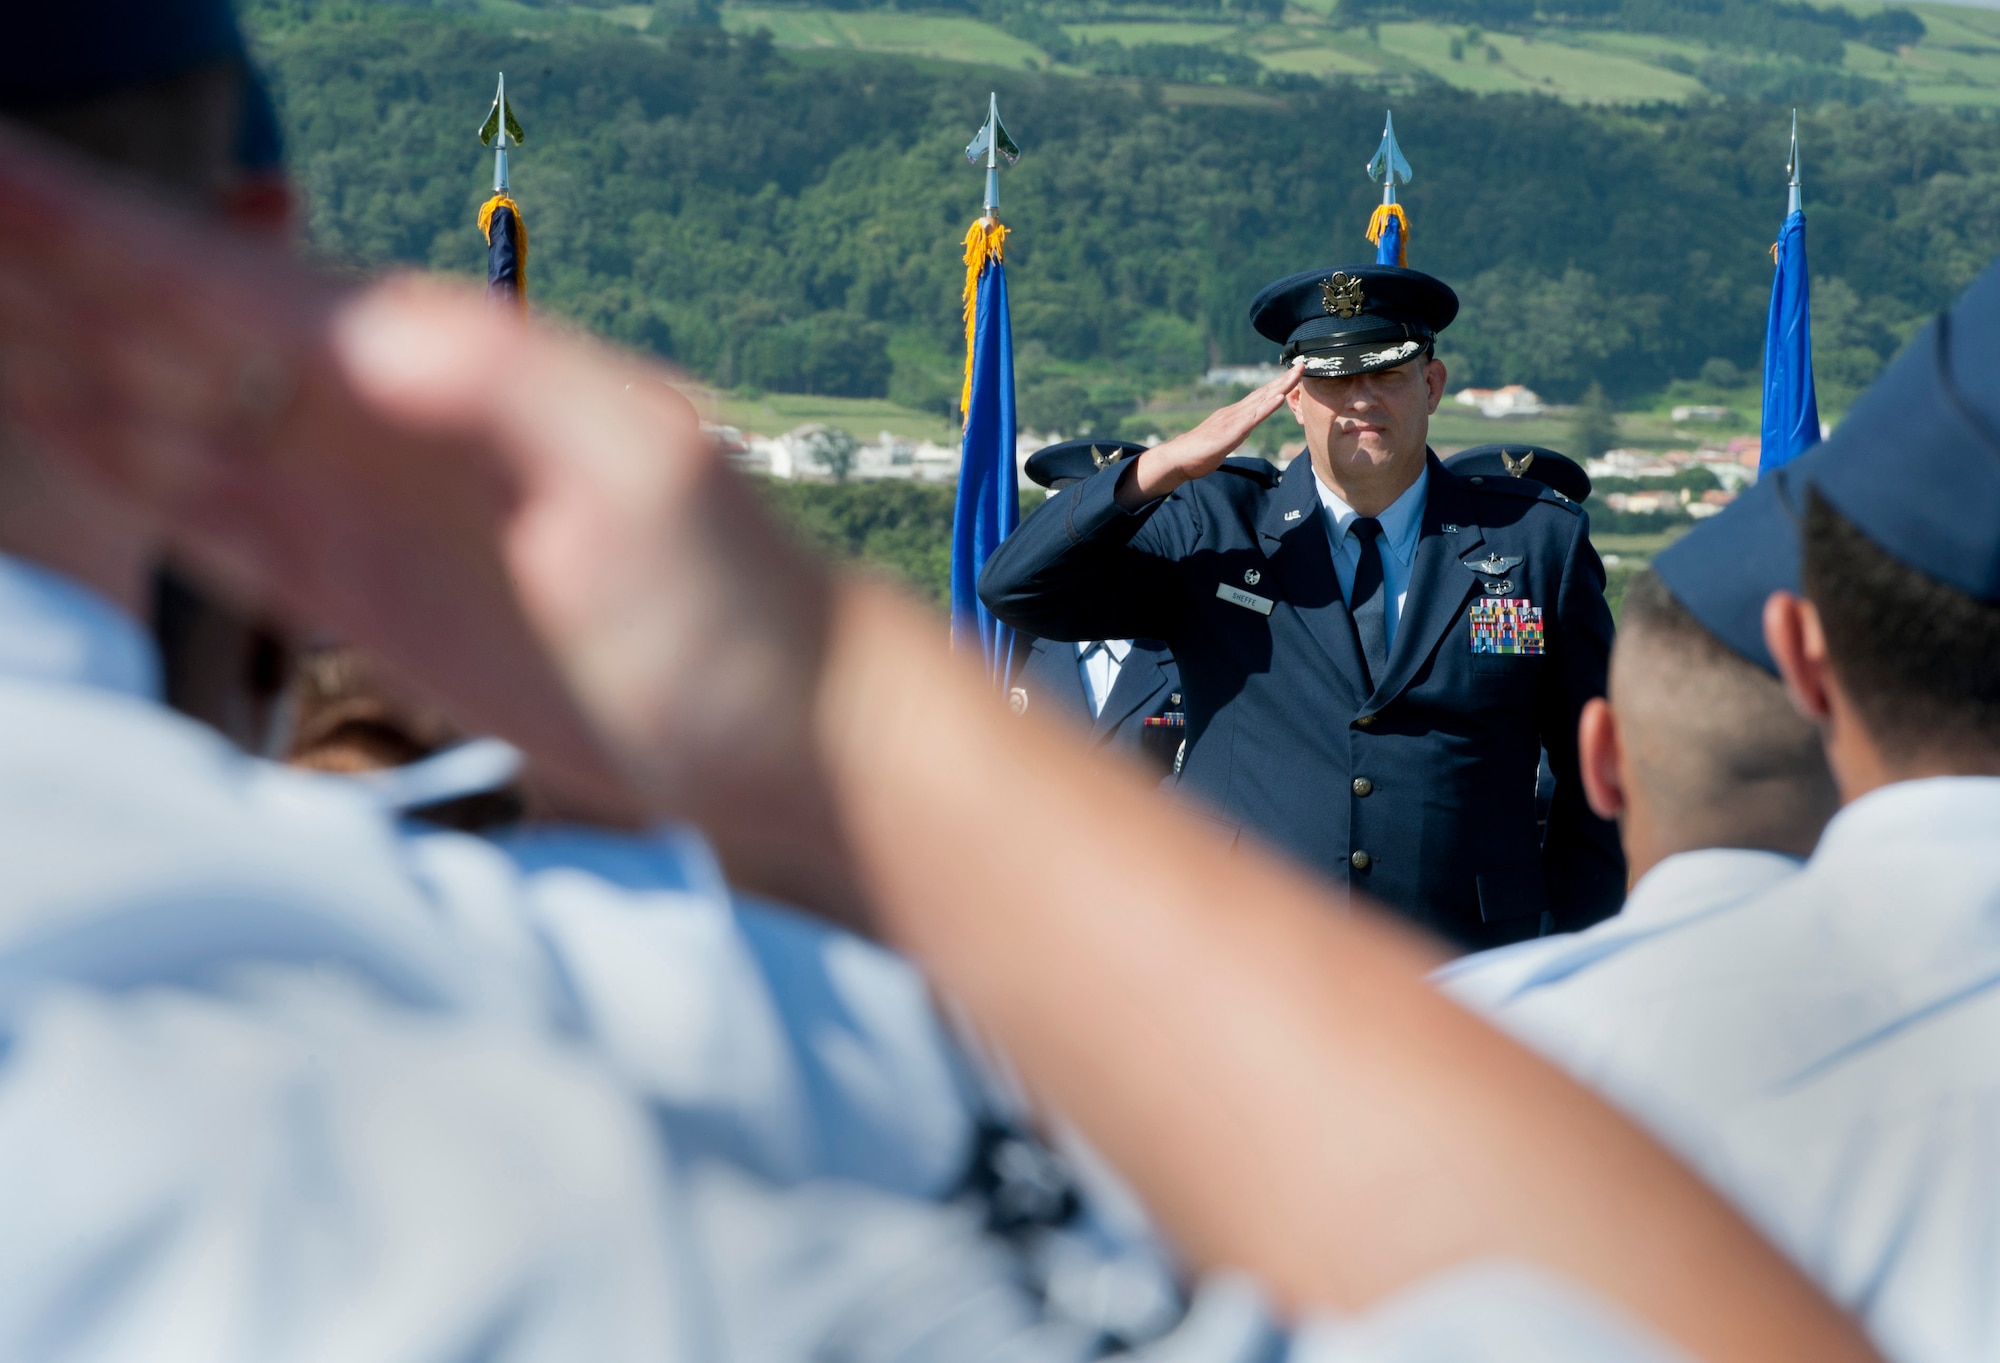 Col. Richard Sheffe, commander of the 65th Air Base Group, is saluted by members of the 65th Air Base Group, during a Redesignation Ceremony on Lajes Field, Azores, Portugal, August 14, 2015. With this Redesignation Ceremony the 65th Air Base Group is now aligned under the 86th Airlift Wing and remains positioned to provide agile combat support and services to aircraft and aircrews. (U.S. Air Force photo by Master Sgt. Bradley C. Church)